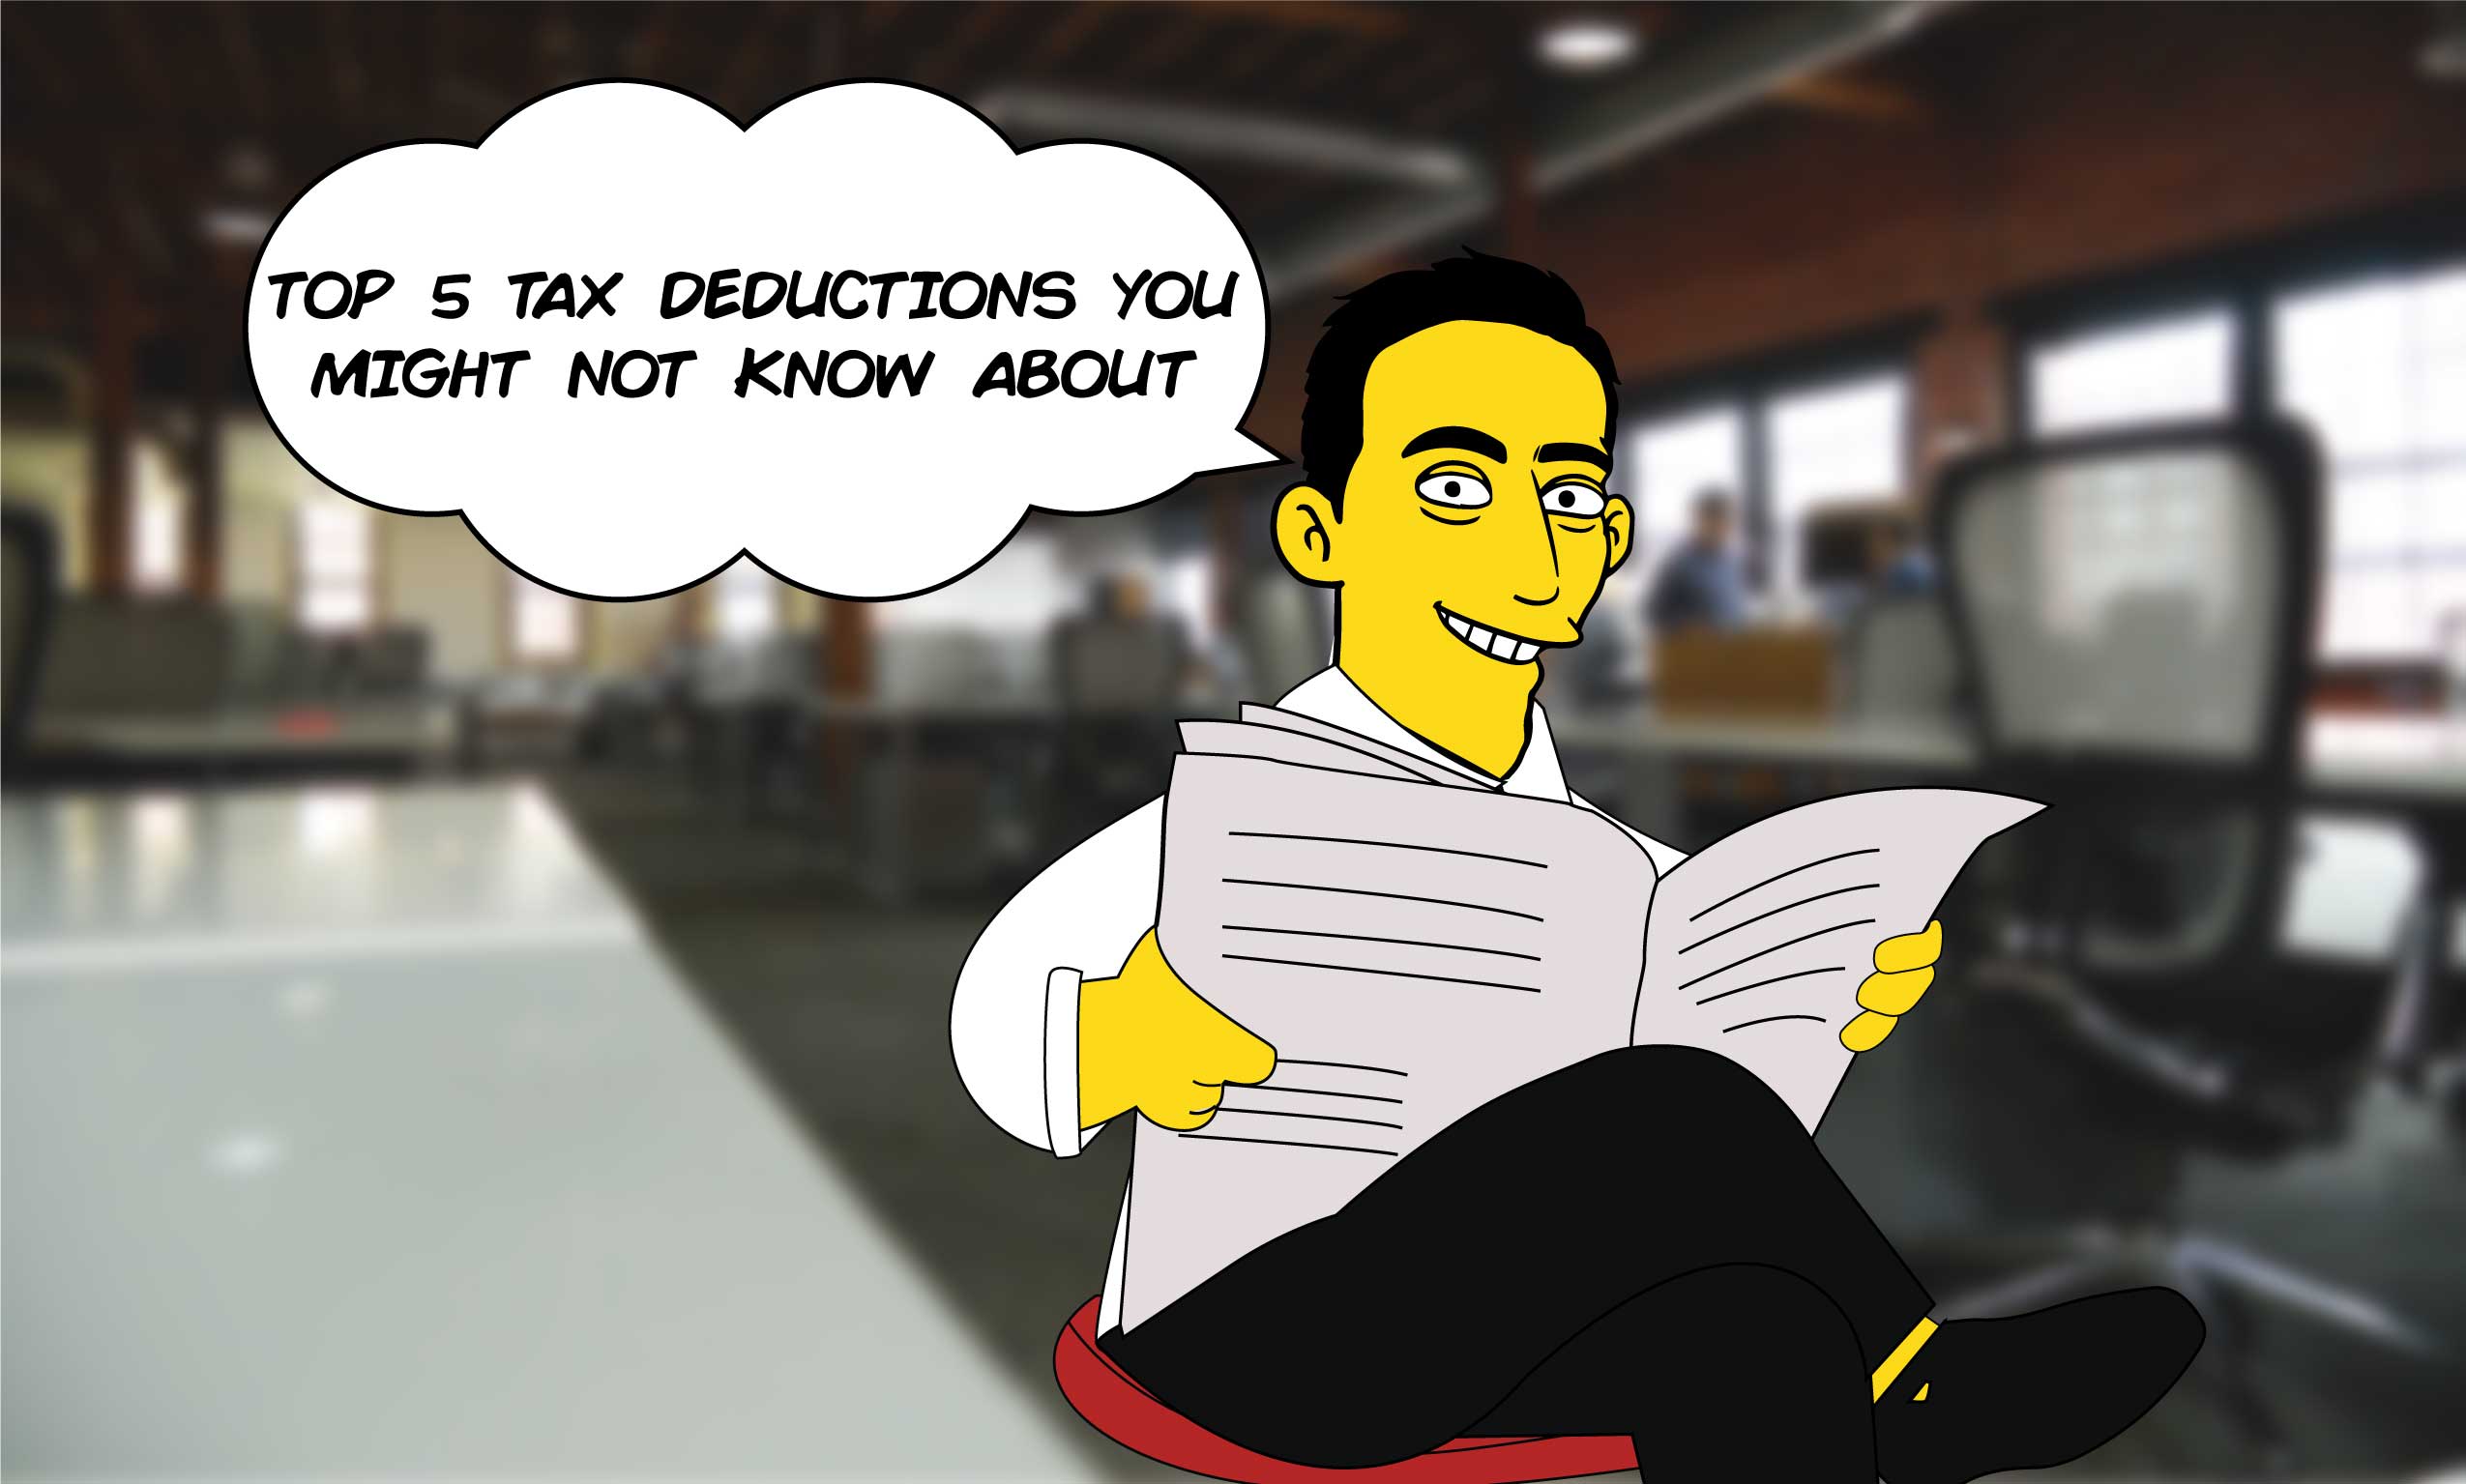 5 Tax Deductions for your etax return